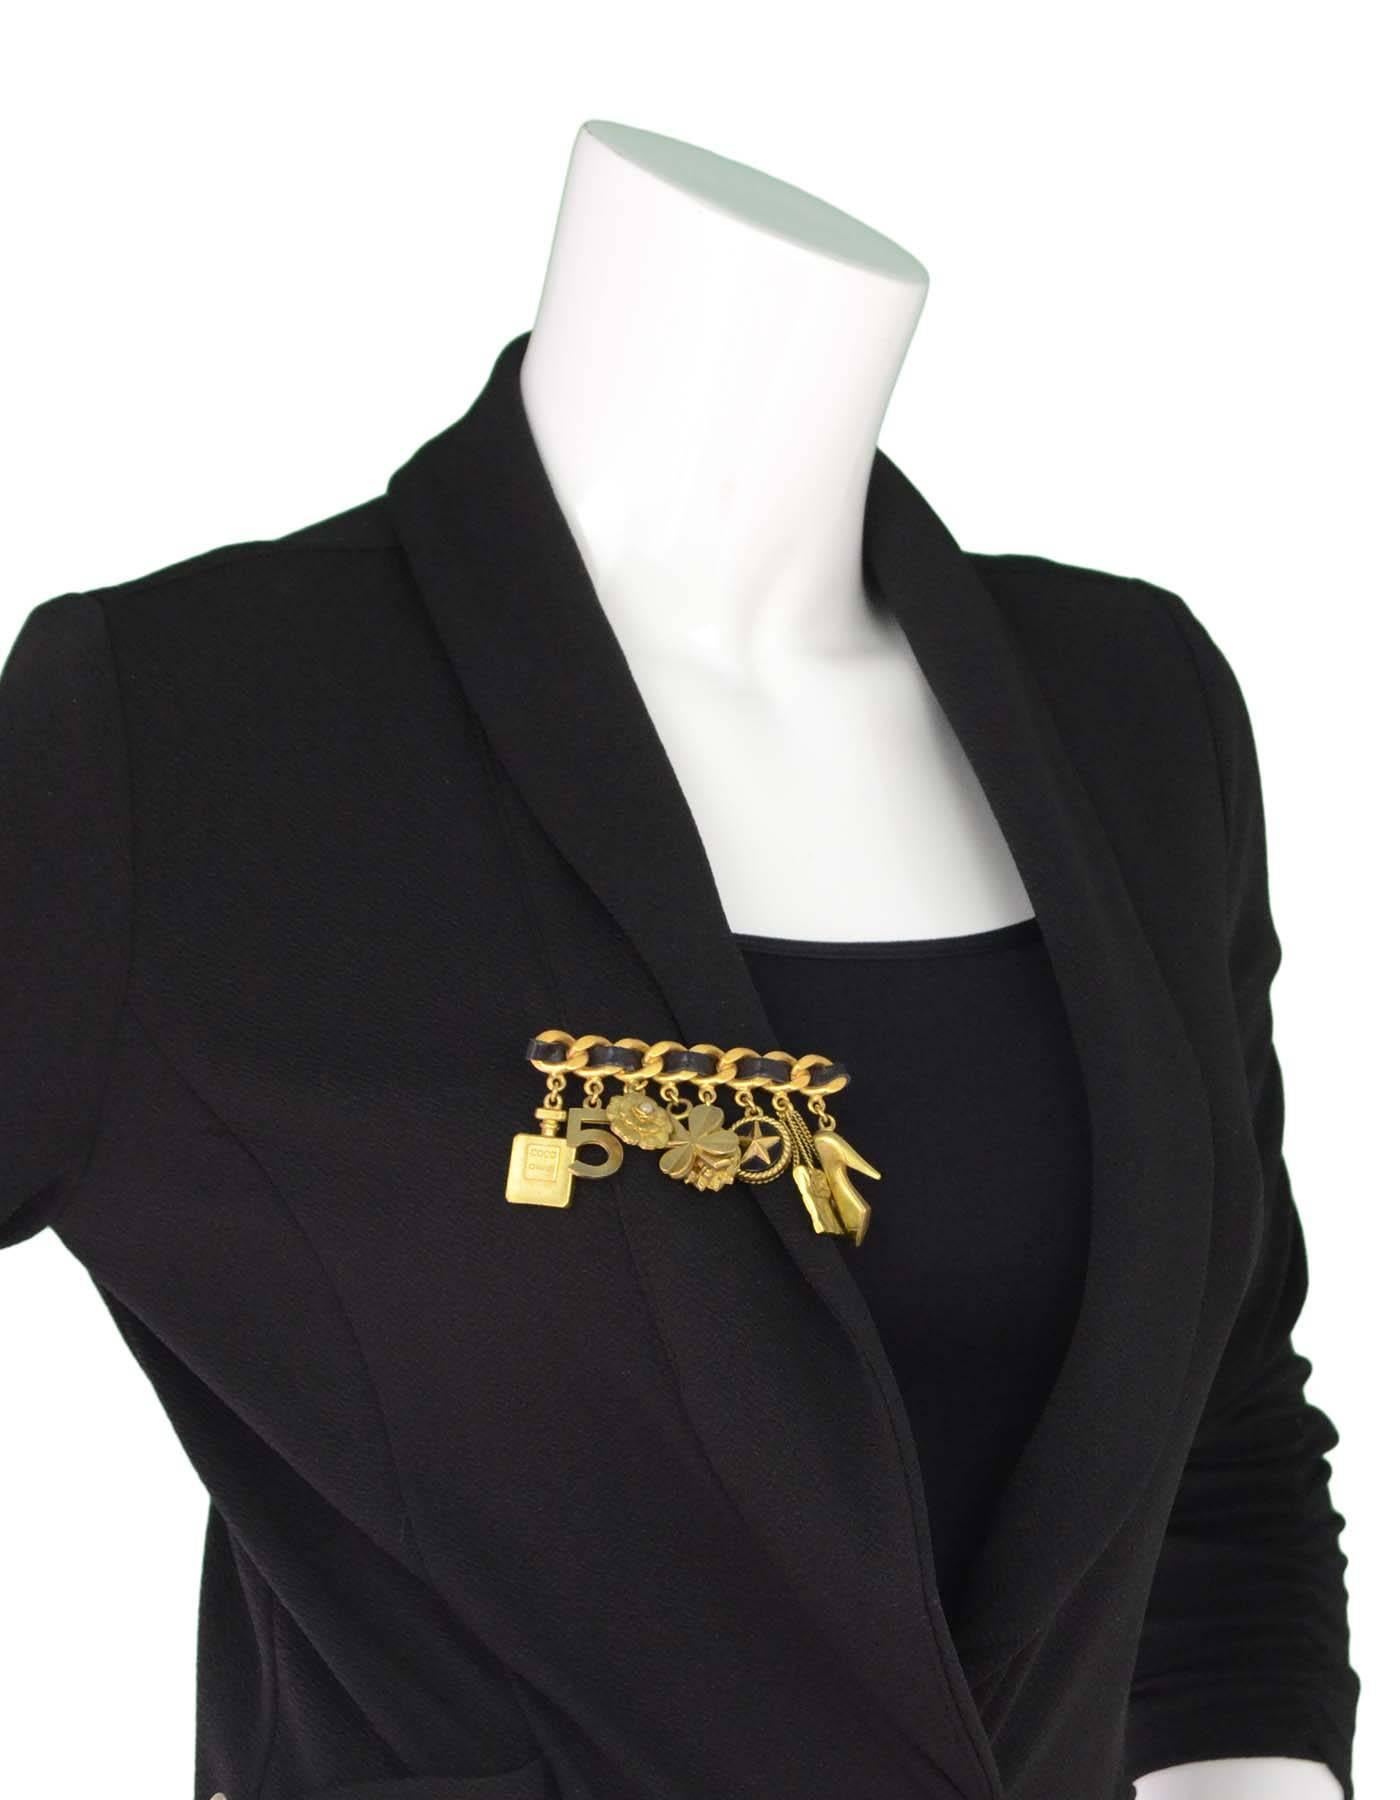 Chanel Leather and Charm Brooch

Made In: France
Year Of Production: 1994
Color: Goldtone and black
Materials: Metal and leather
Closure: Pin back closure
Stamp: Chanel 94 CC P MAde in France
Overall Condition: Very good vintage pre-owned